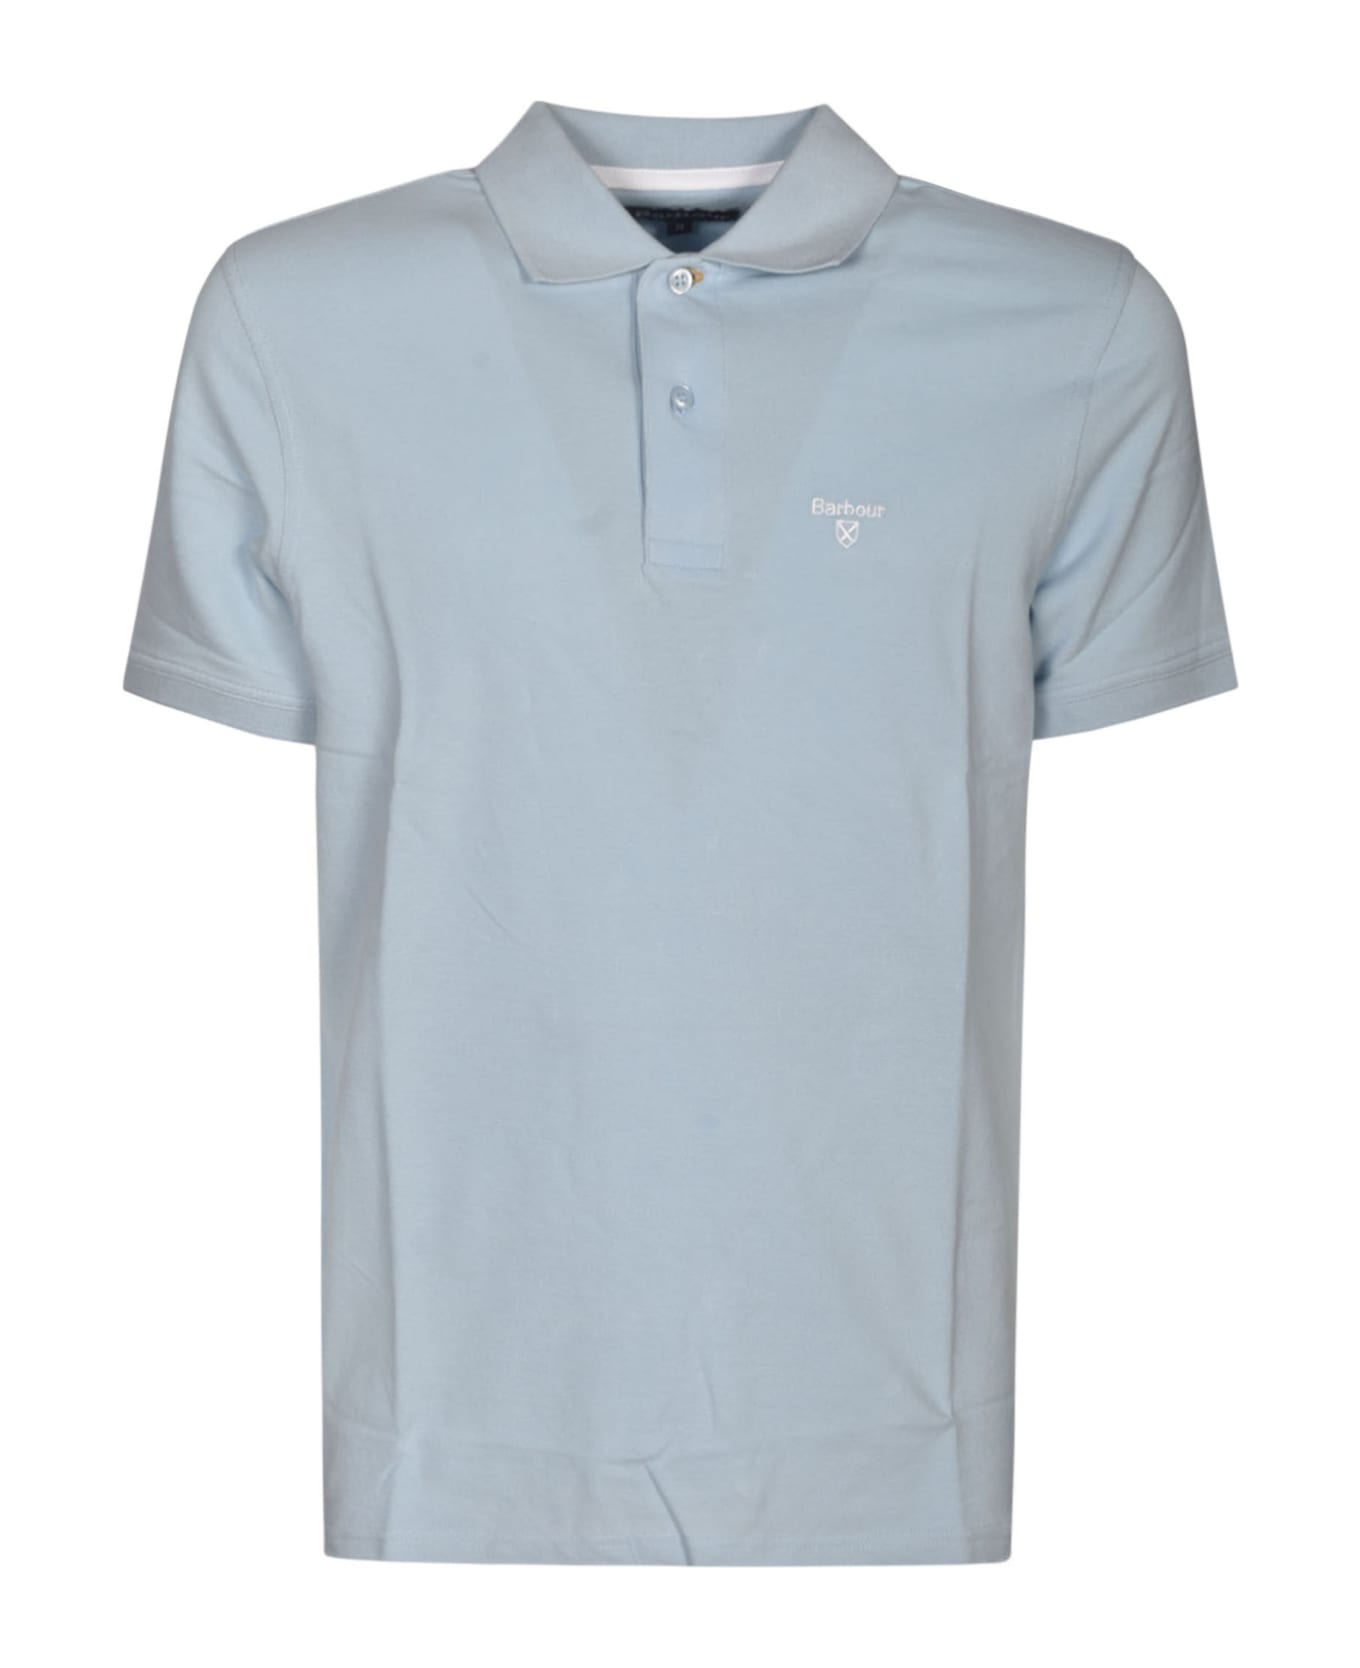 Barbour Lightweight Polo Shirt - Chambray blue